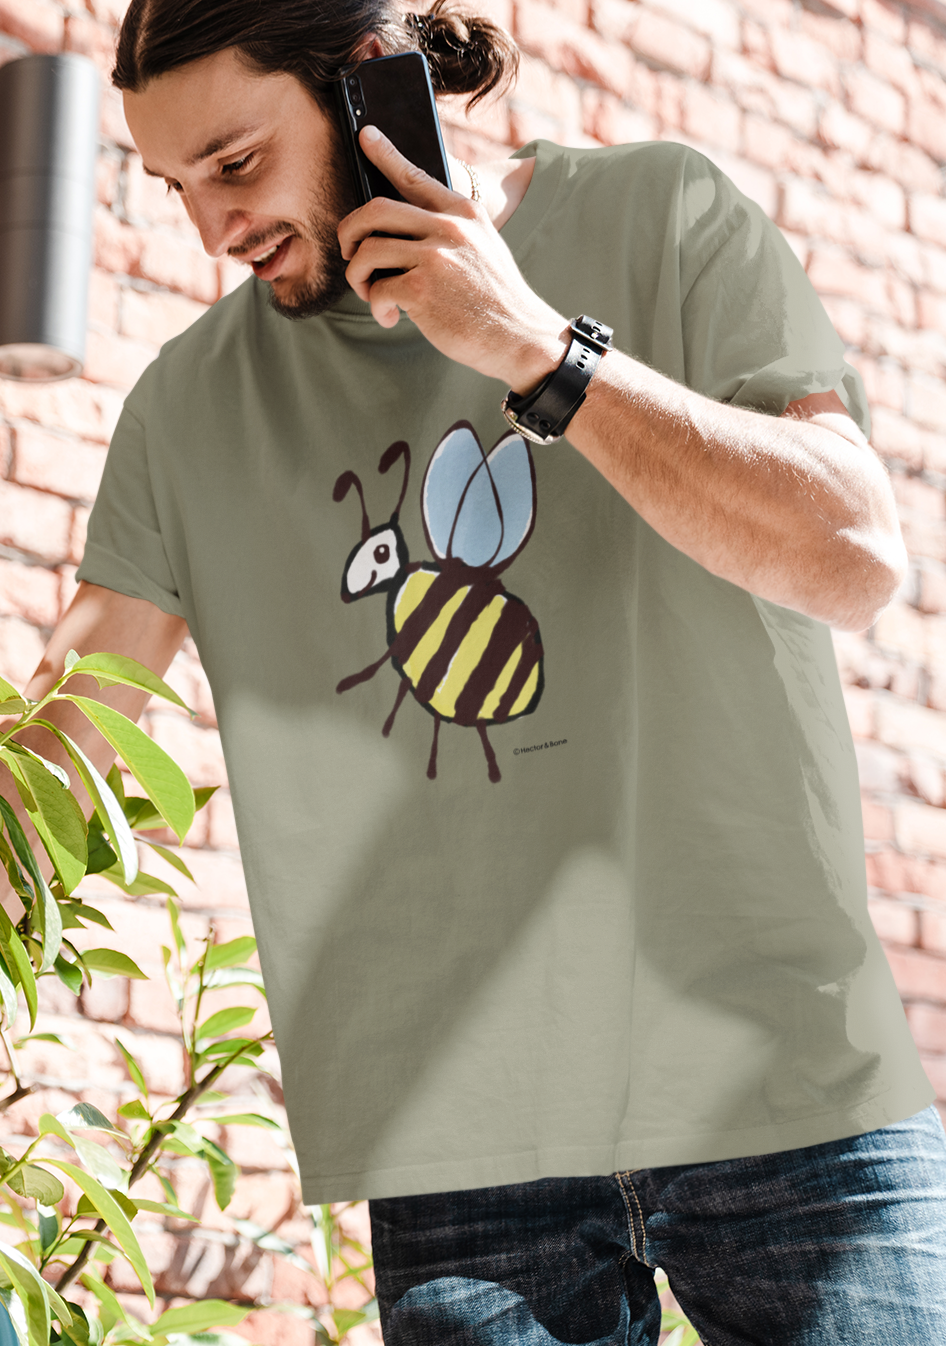 Bee T-shirt - Young man wearing a cute Busy Bee illustrated heather grey vegan cotton t-shirts by Hector and Bone